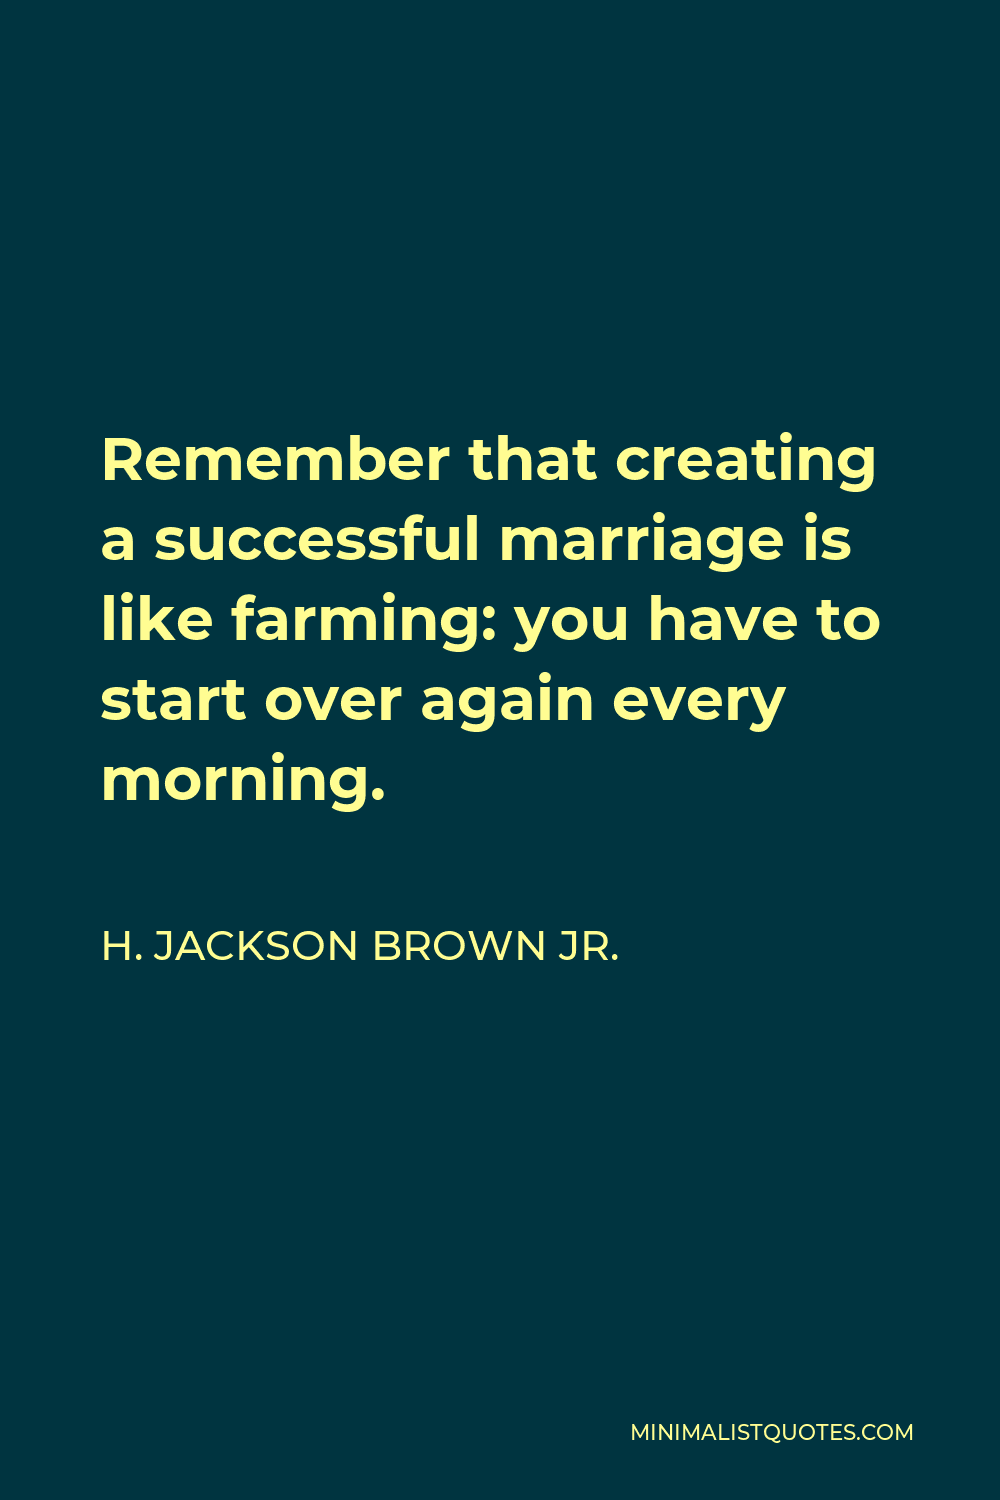 H. Jackson Brown Jr. Quote Remember that creating a successful